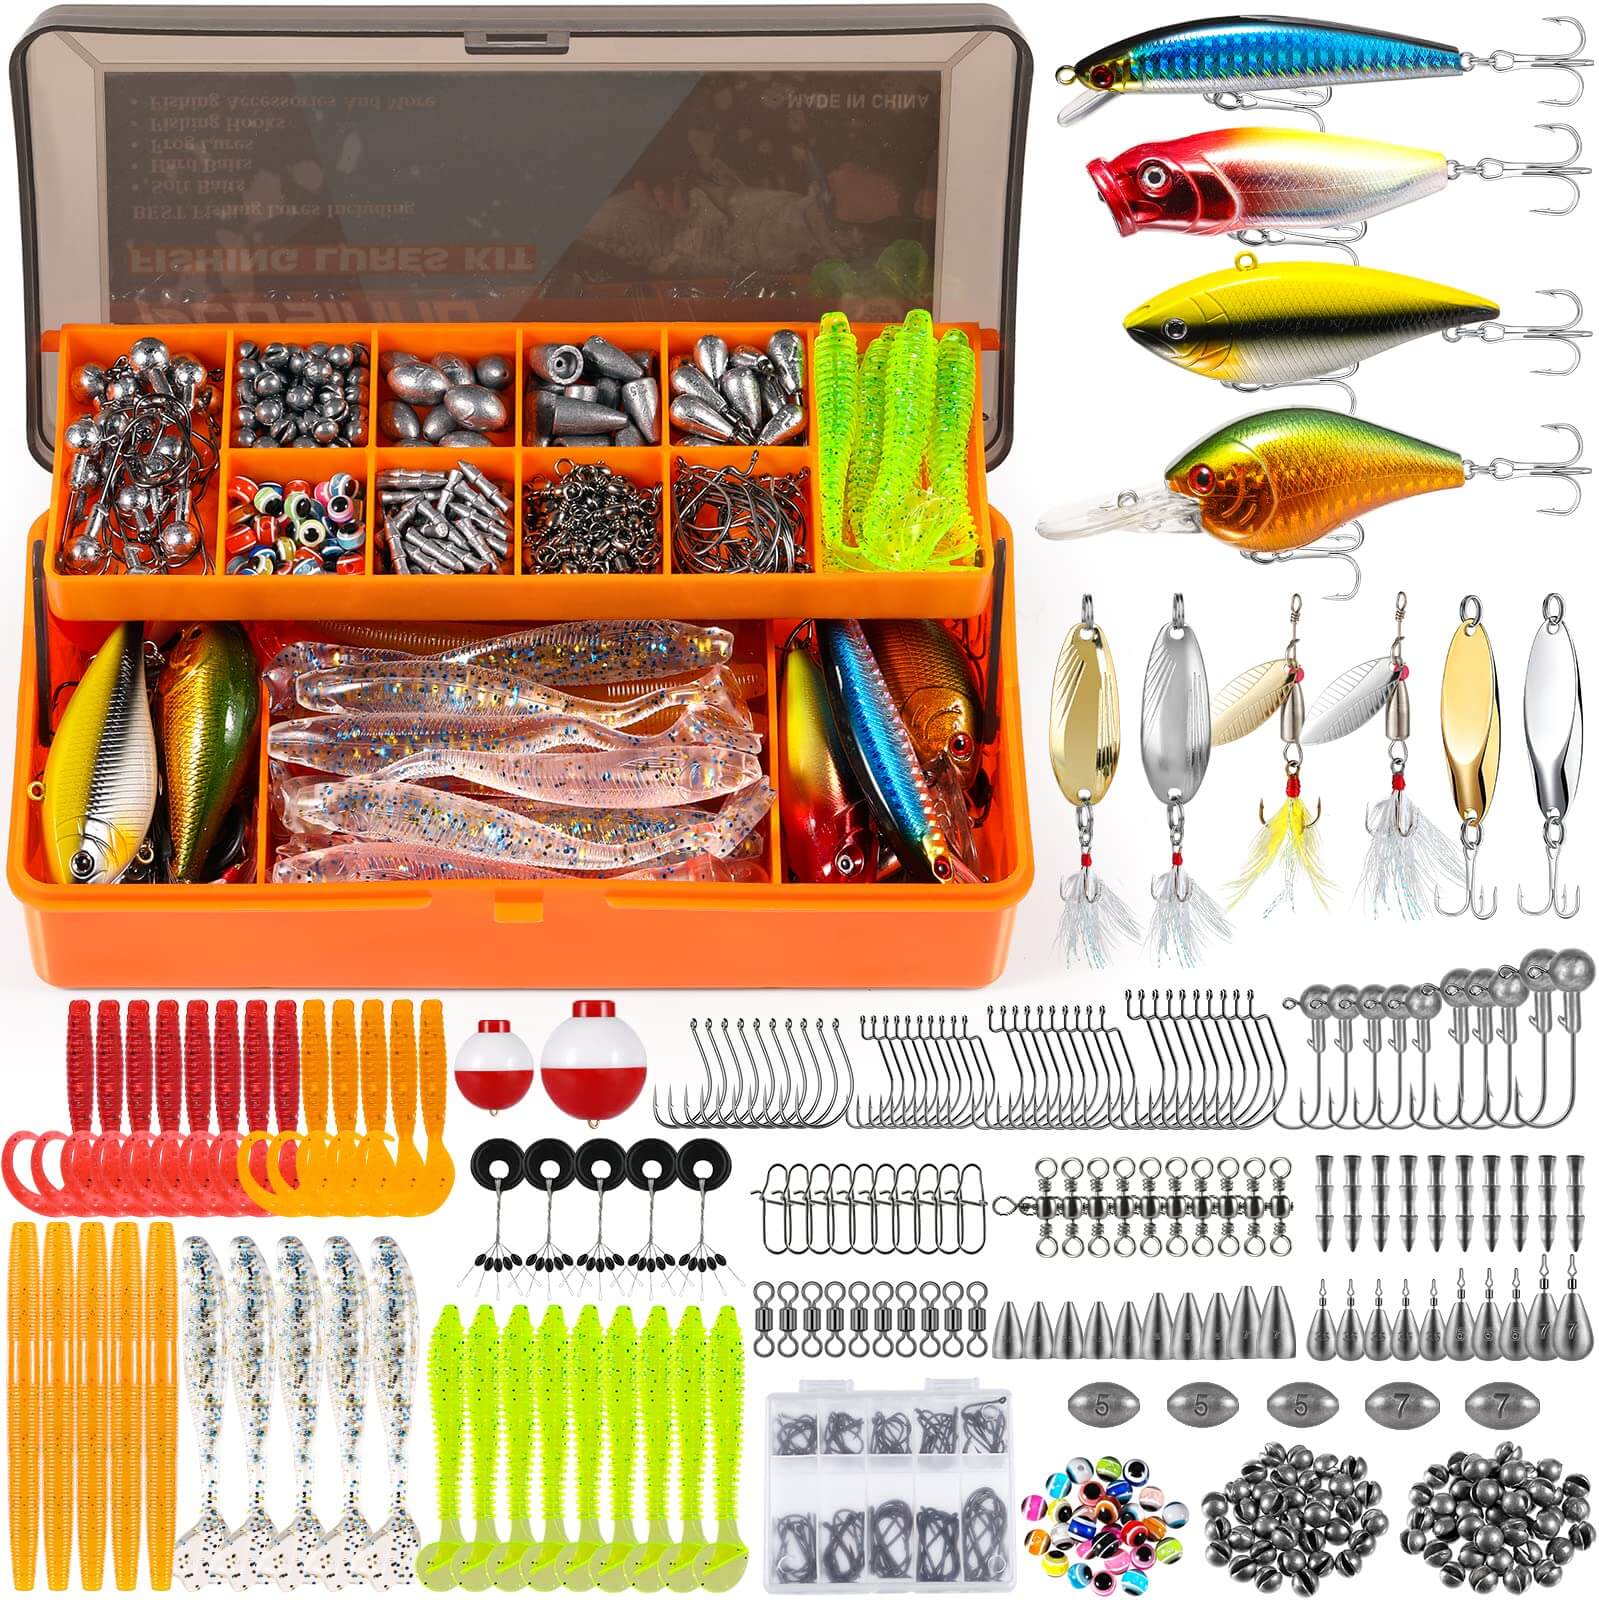  PLUSINNO 201pcs Fishing Accessories Kit, Fishing Tackle Box  with Tackle Included, Fishing Hooks, Fishing Weights, Round Split  Shot，Fishing Gear for Bass, Trout, Catfish : Sports & Outdoors